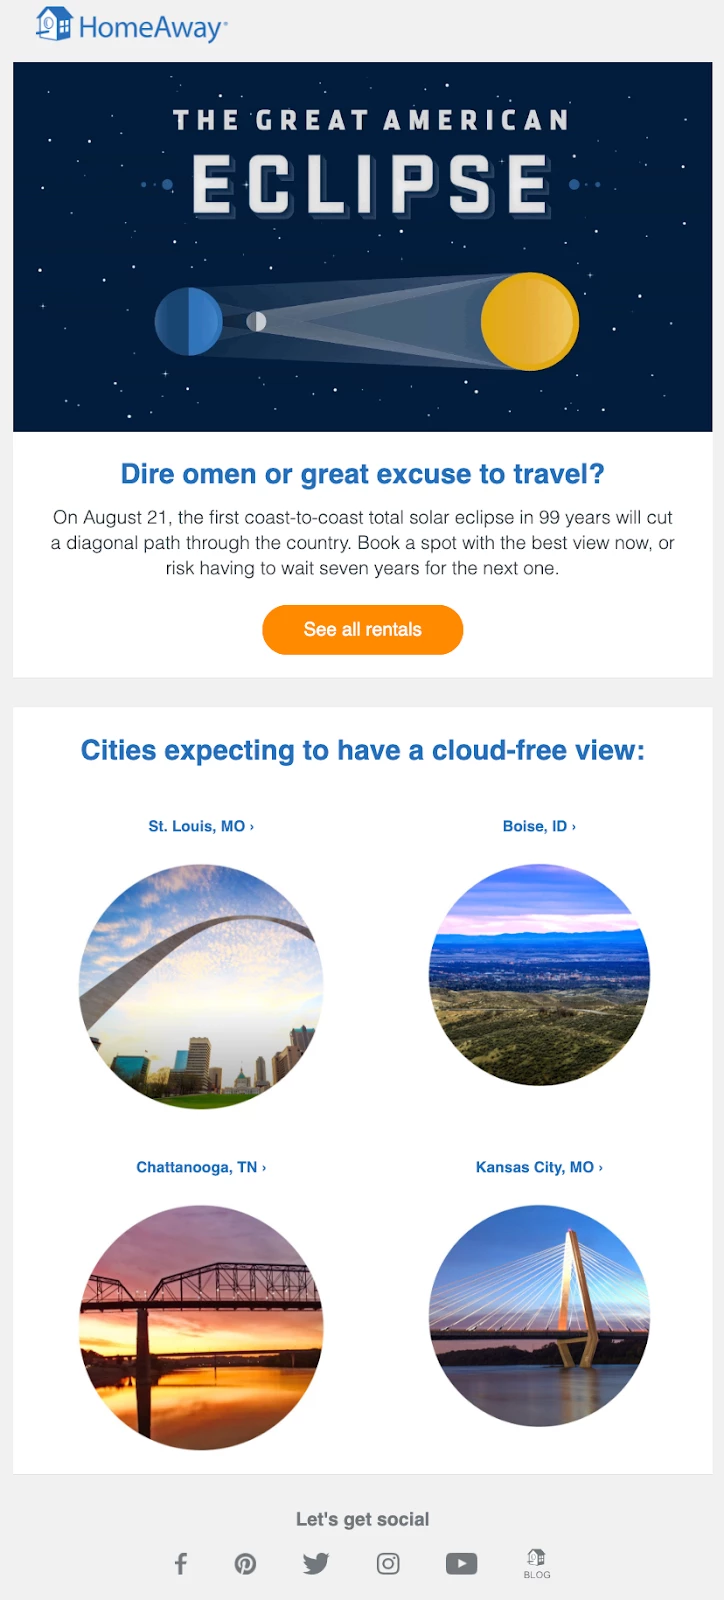 HomeAway June newsletter with an eclipse graphic and 4 images of ideal viewing cities.